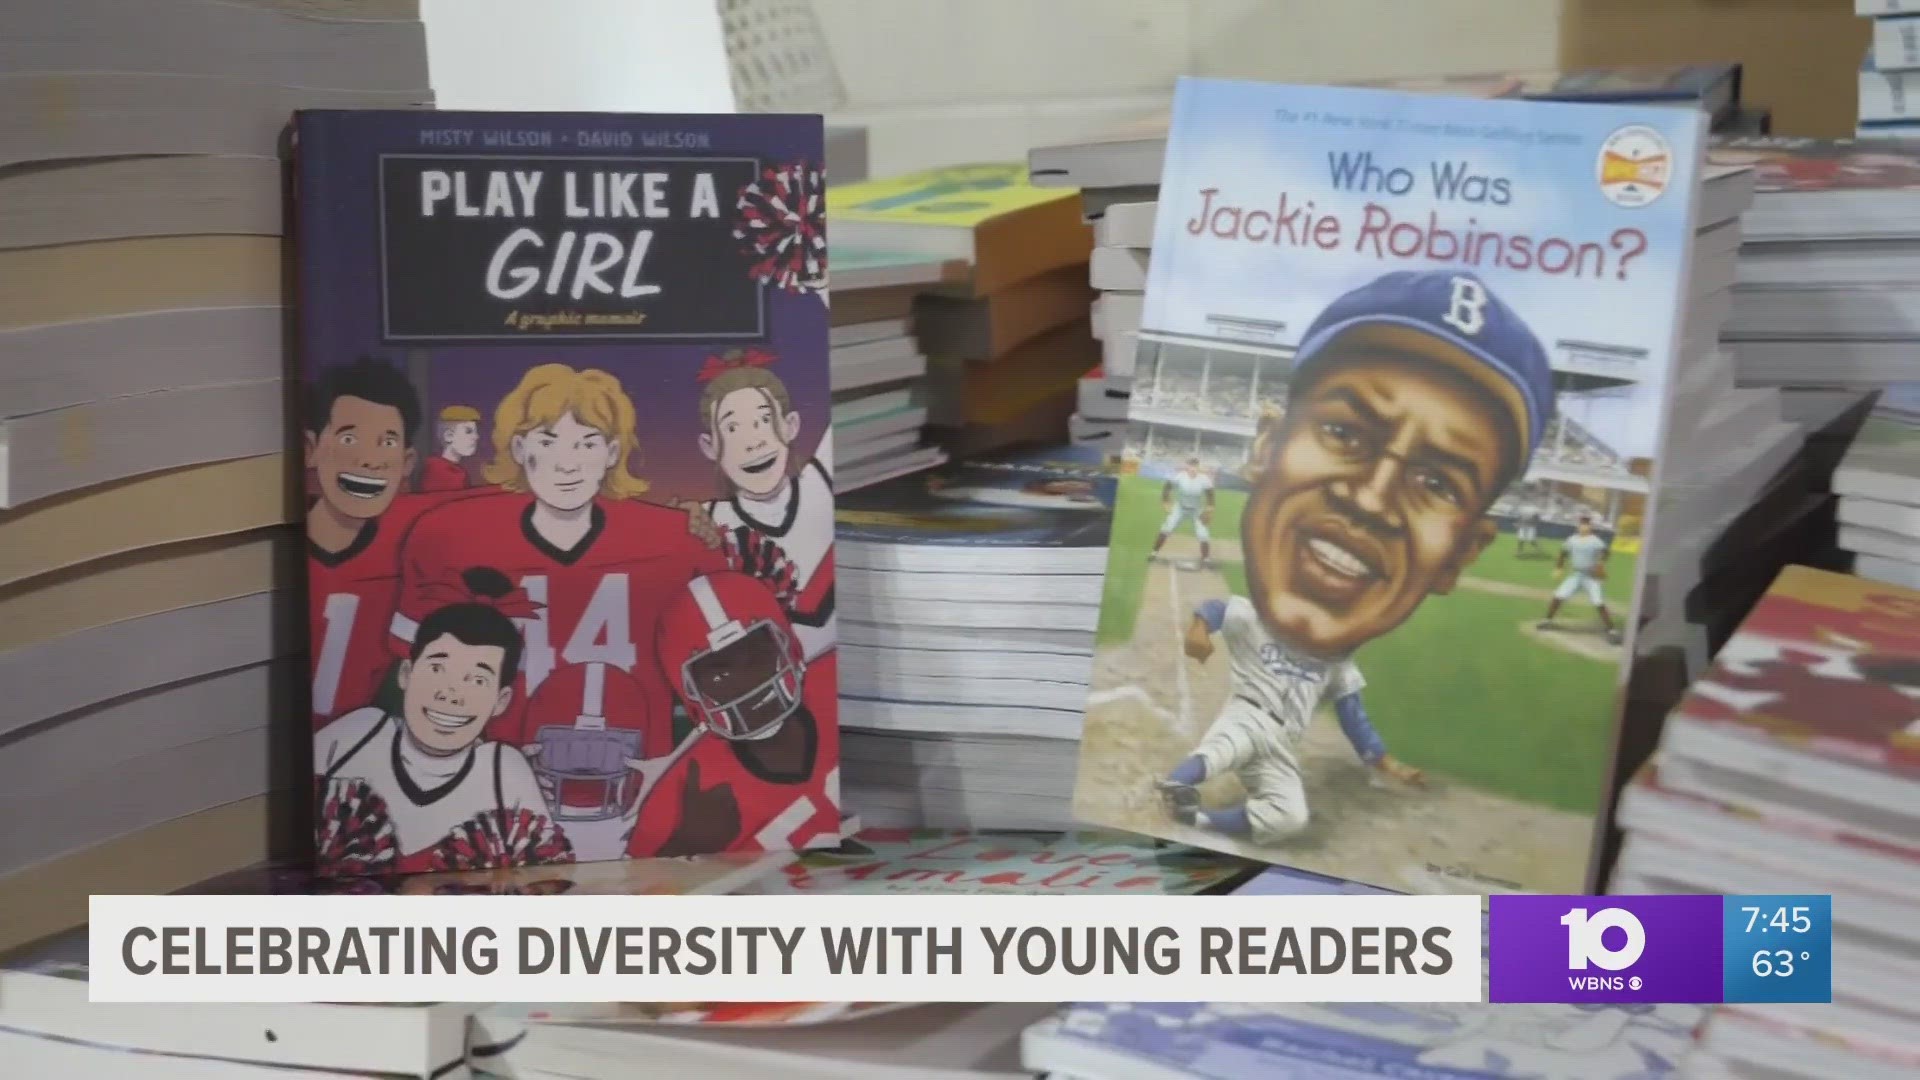 According to the event’s organizers, it is vital for young readers to have the opportunity to see themselves reflected in the books that they are reading.